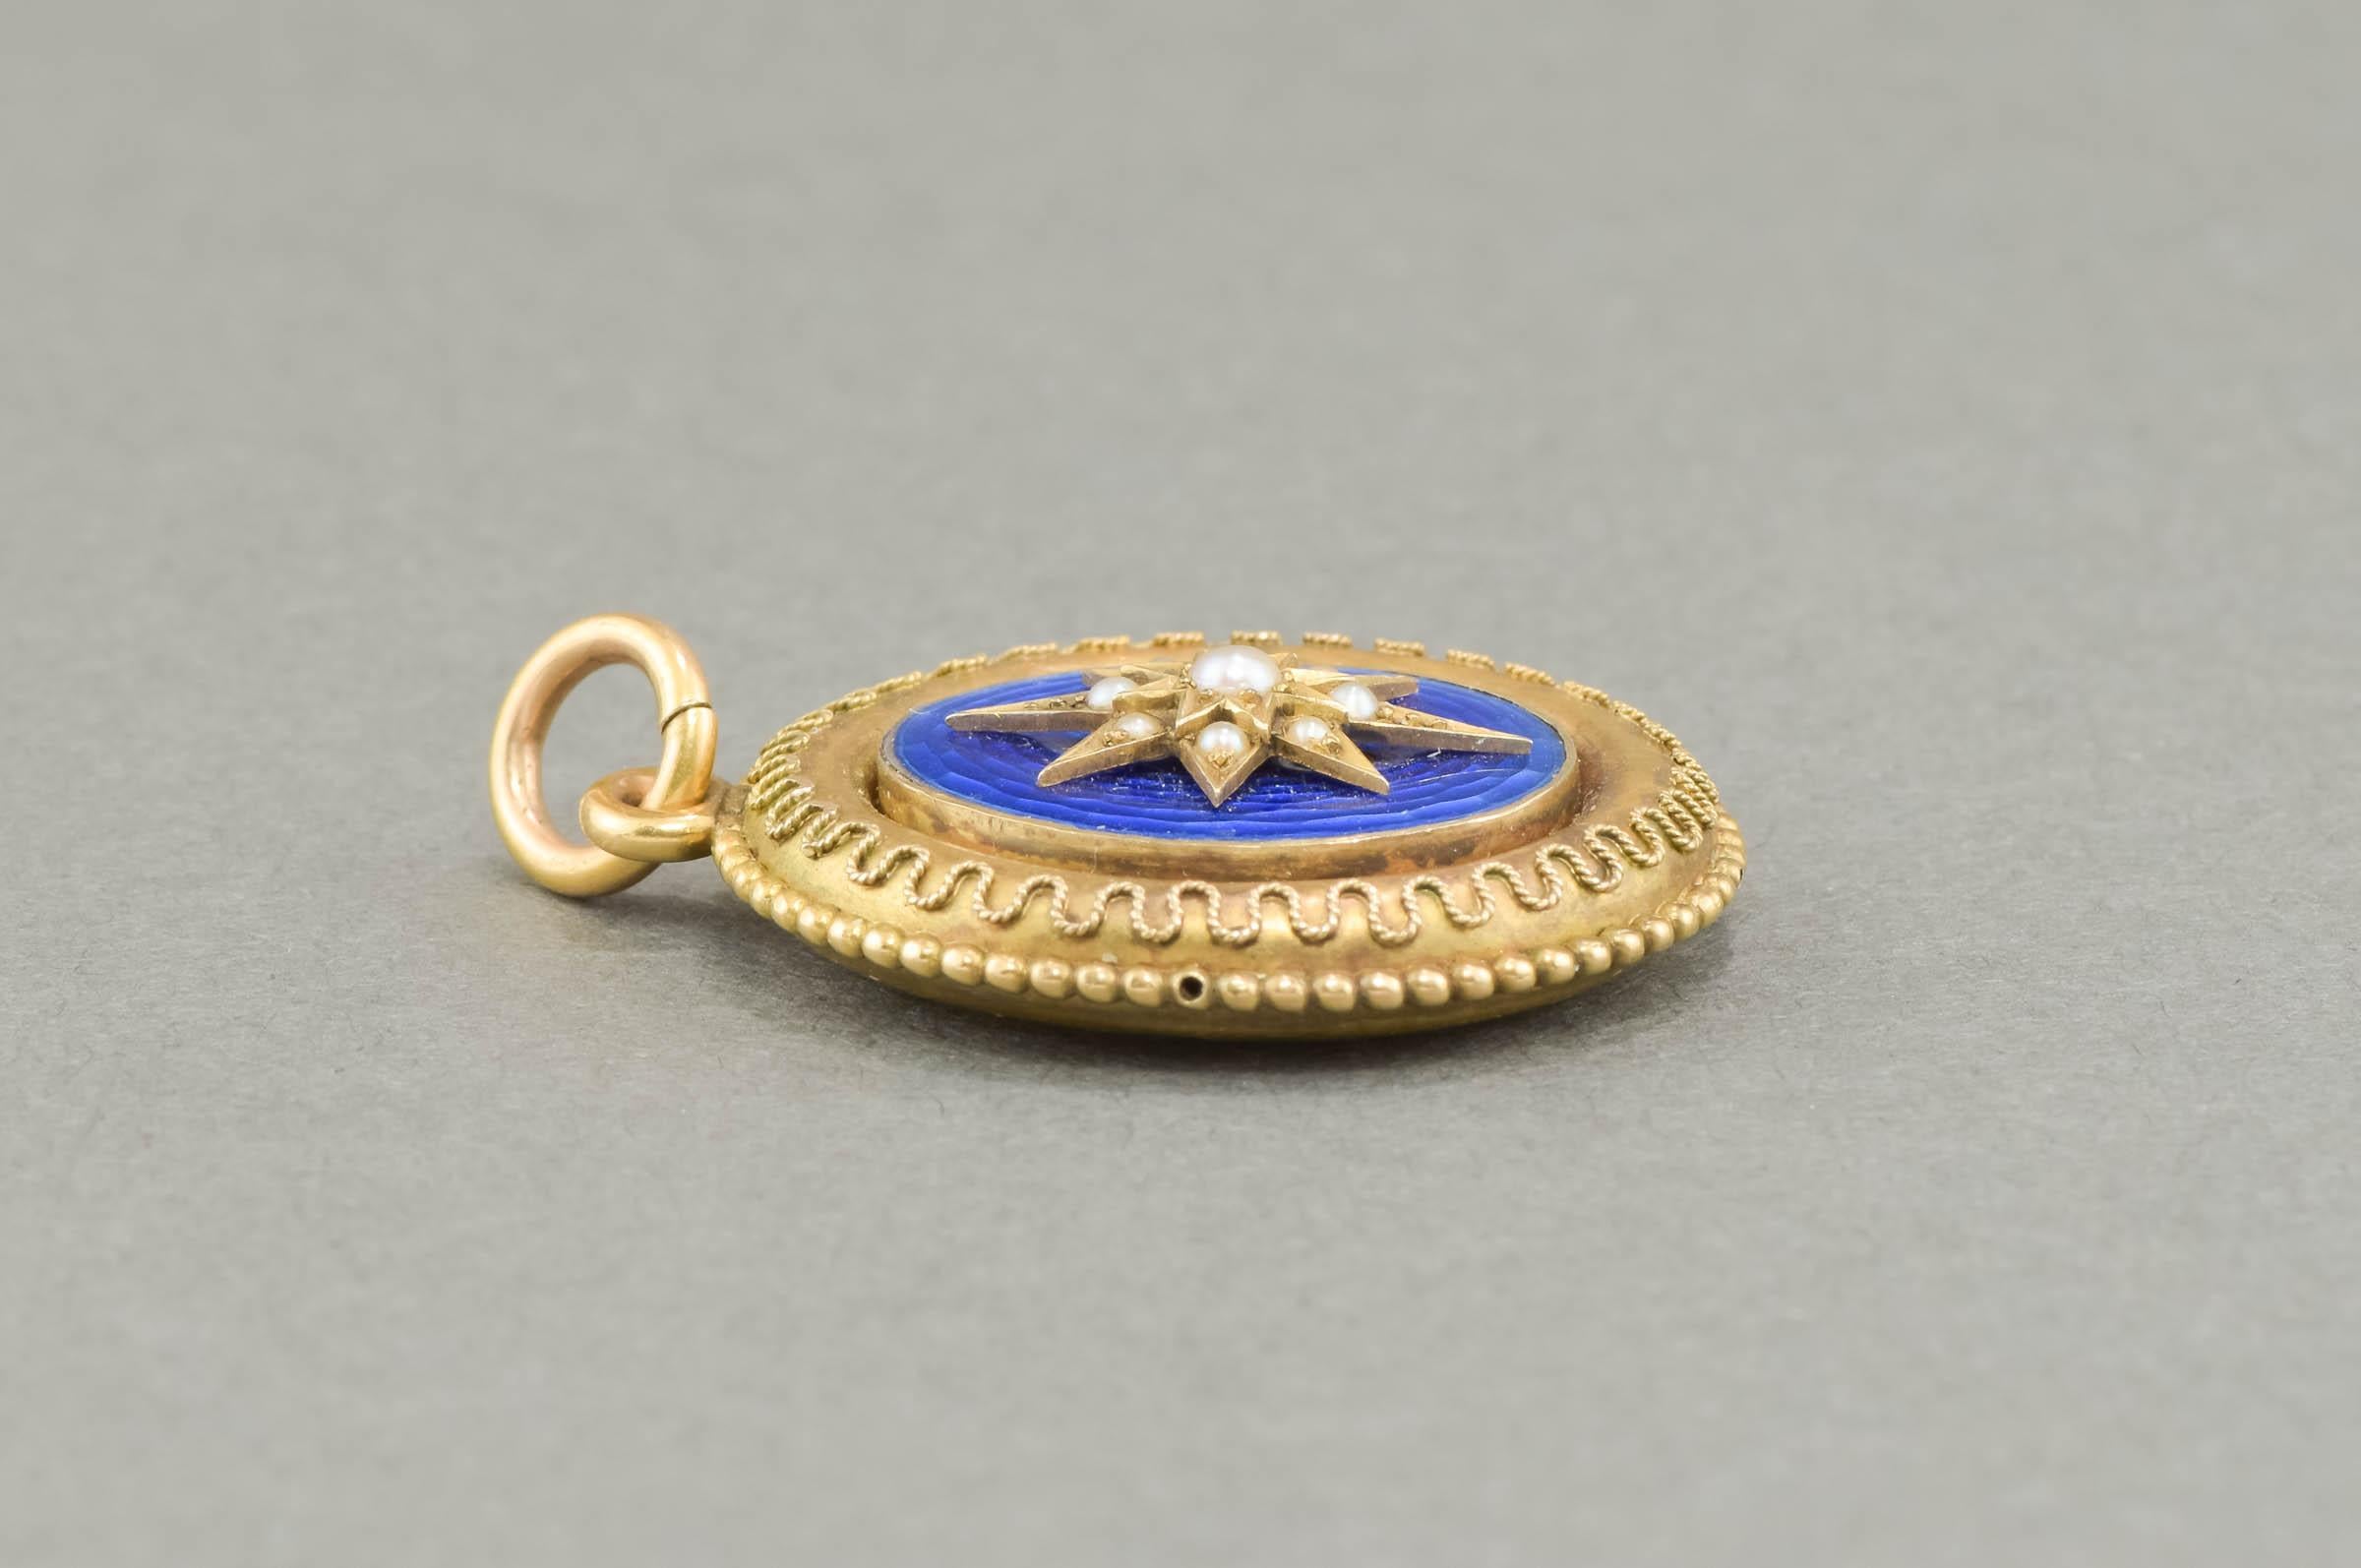 Victorian Gold Star Locket with Blue Guilloche Enamel & Pearls 2